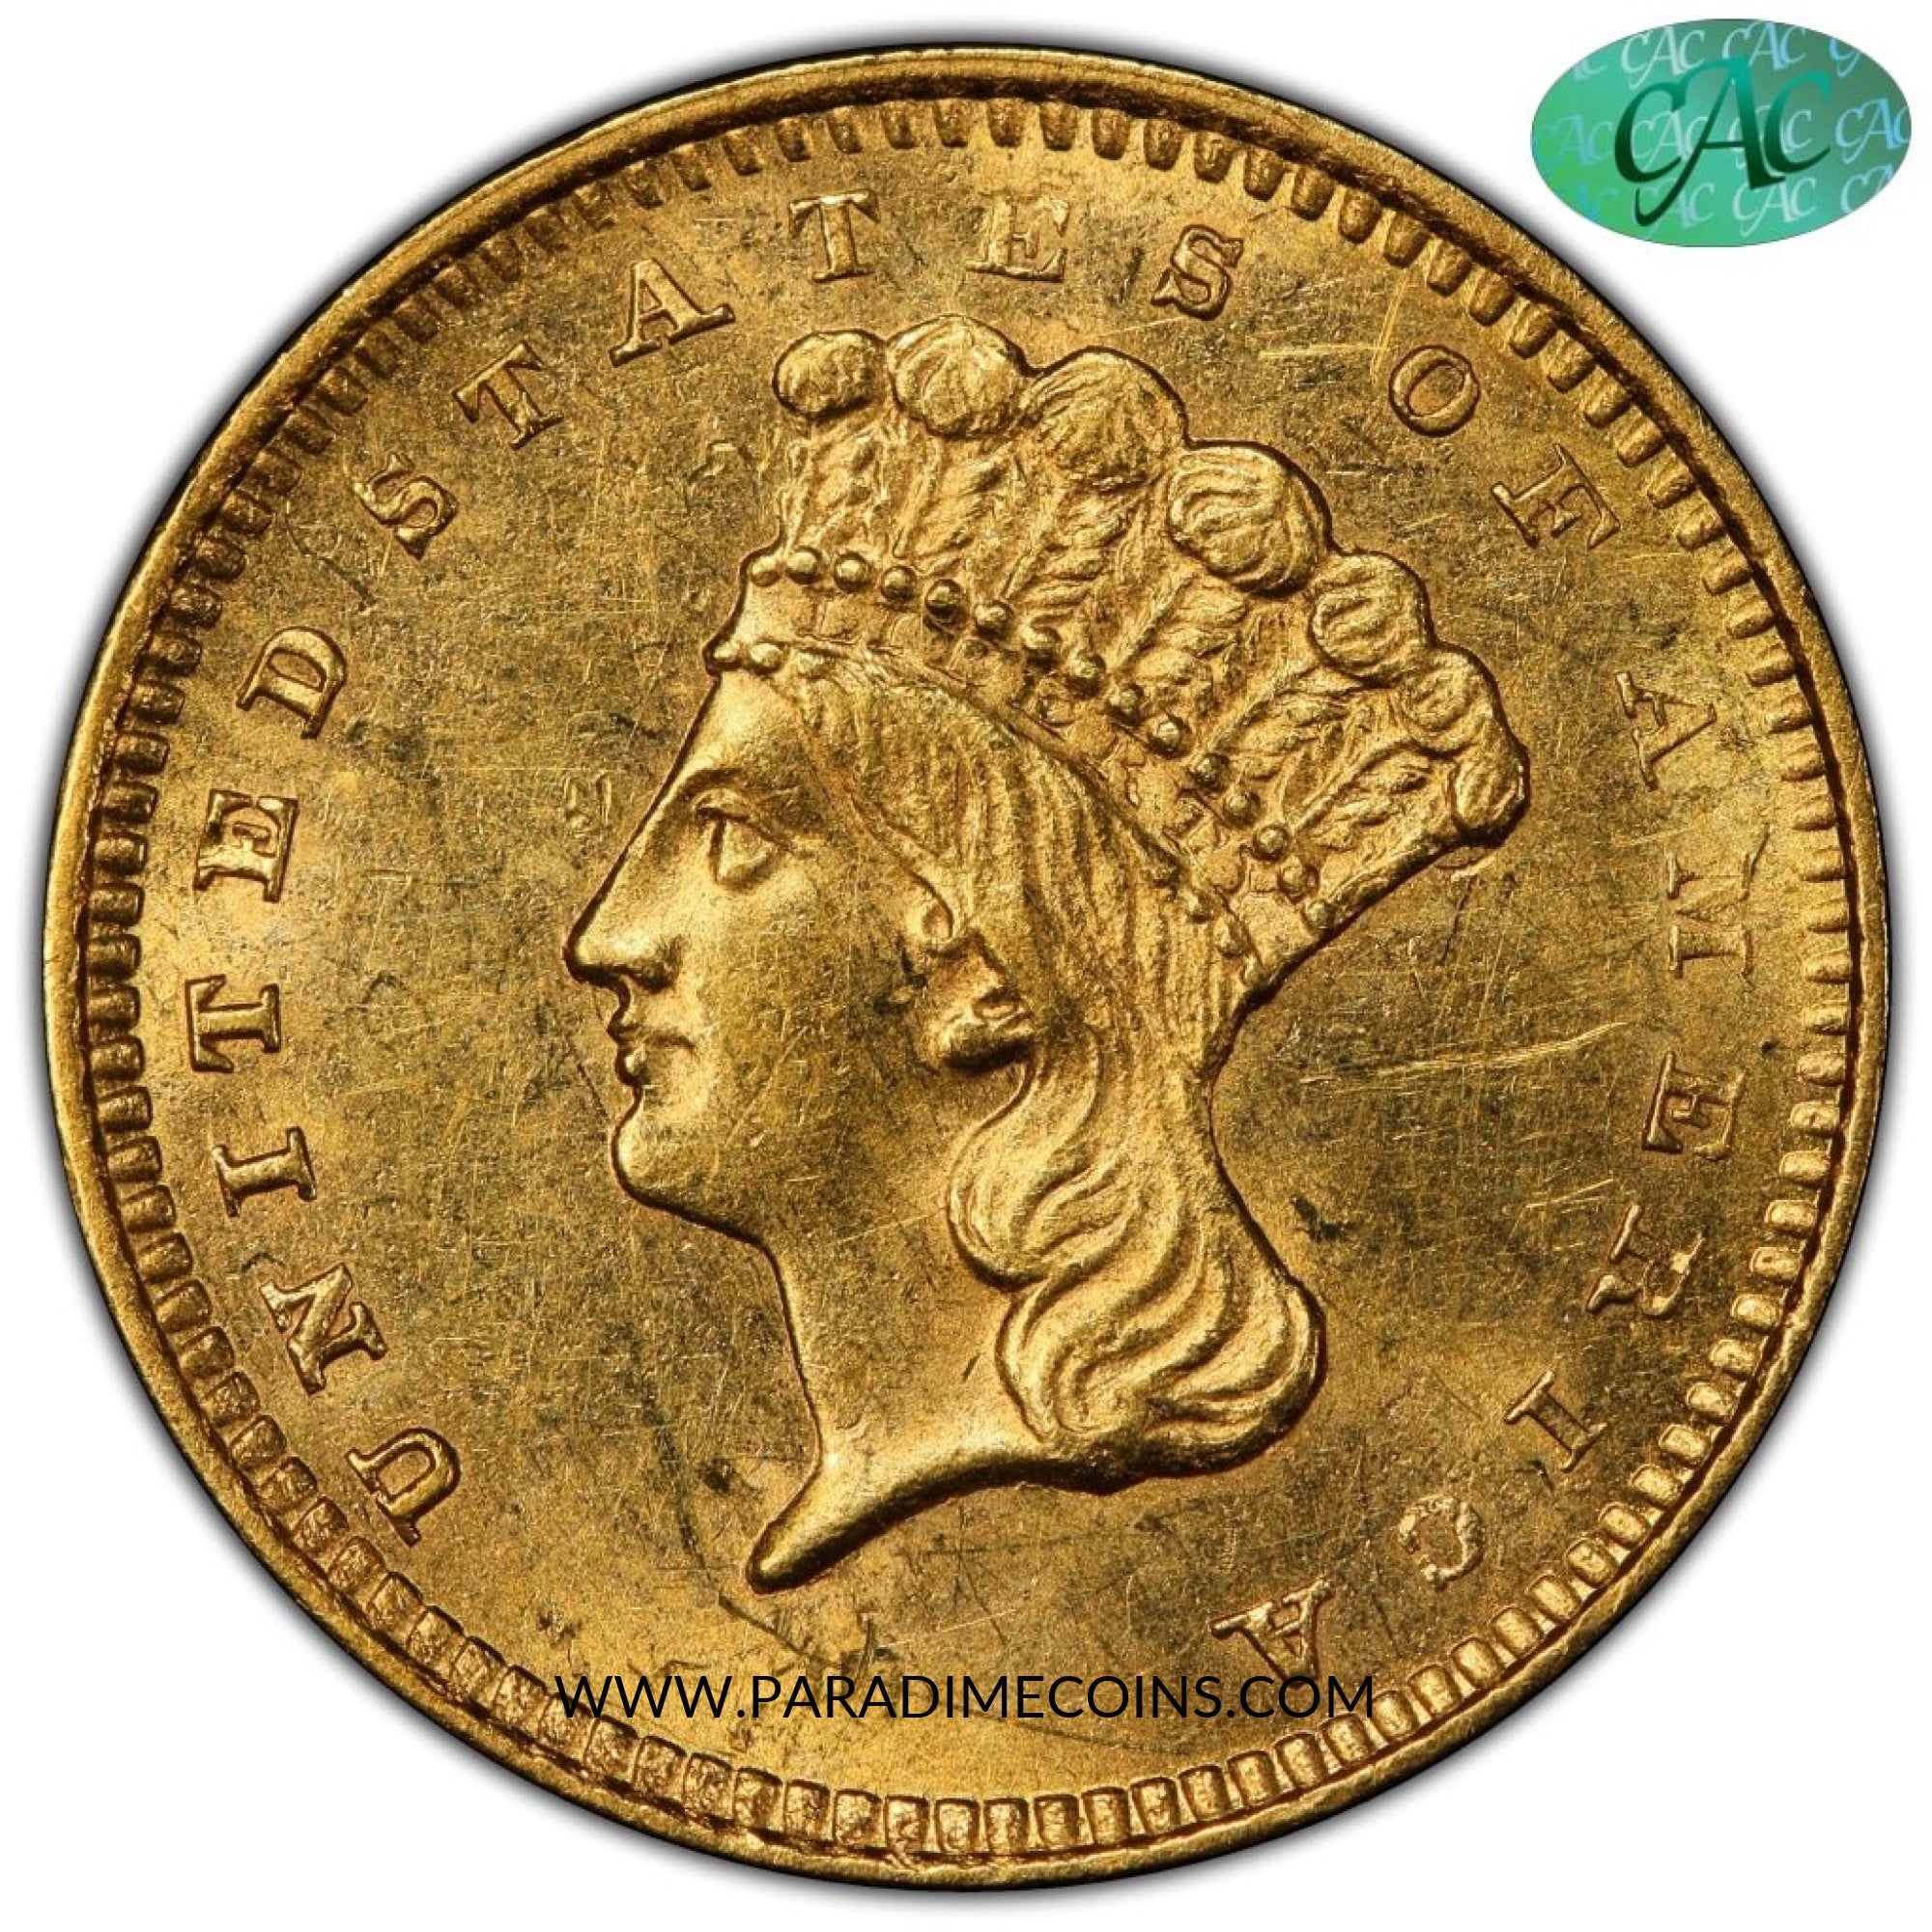 1857-S G$1 MS61 PCGS CAC - Paradime Coins | PCGS NGC CACG CAC Rare US Numismatic Coins For Sale